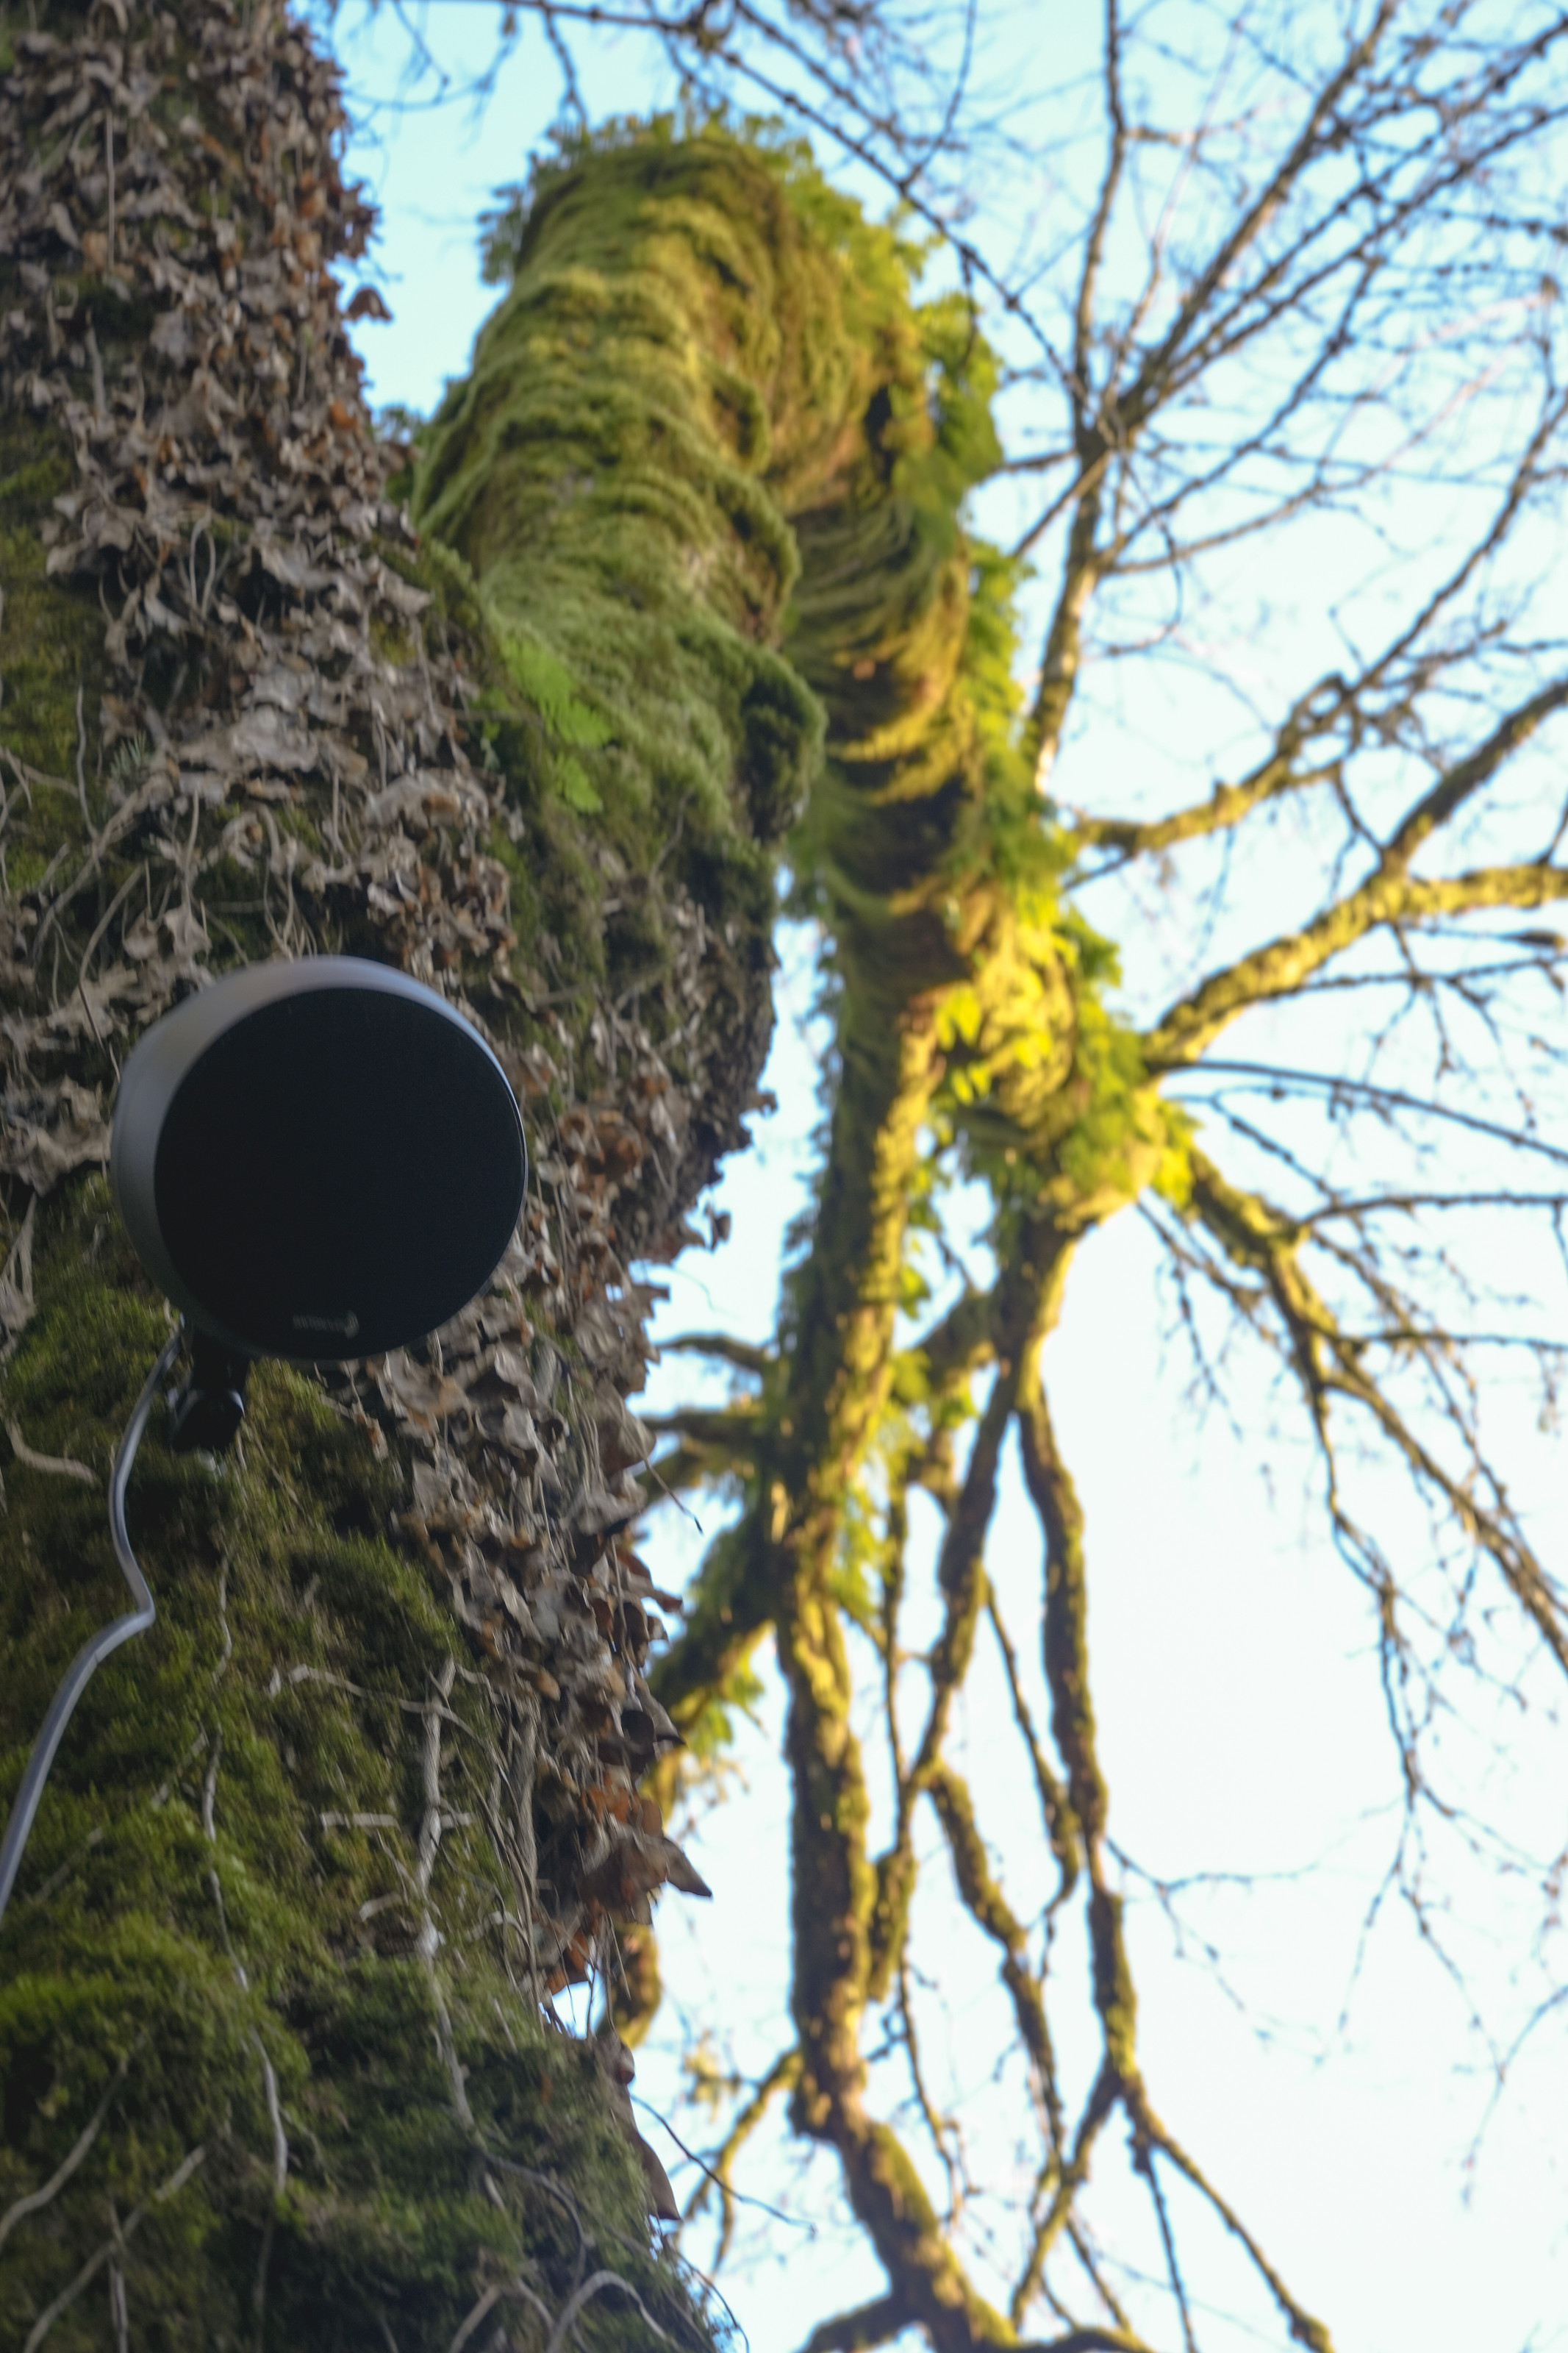 A speaker attached to a tree trunk.